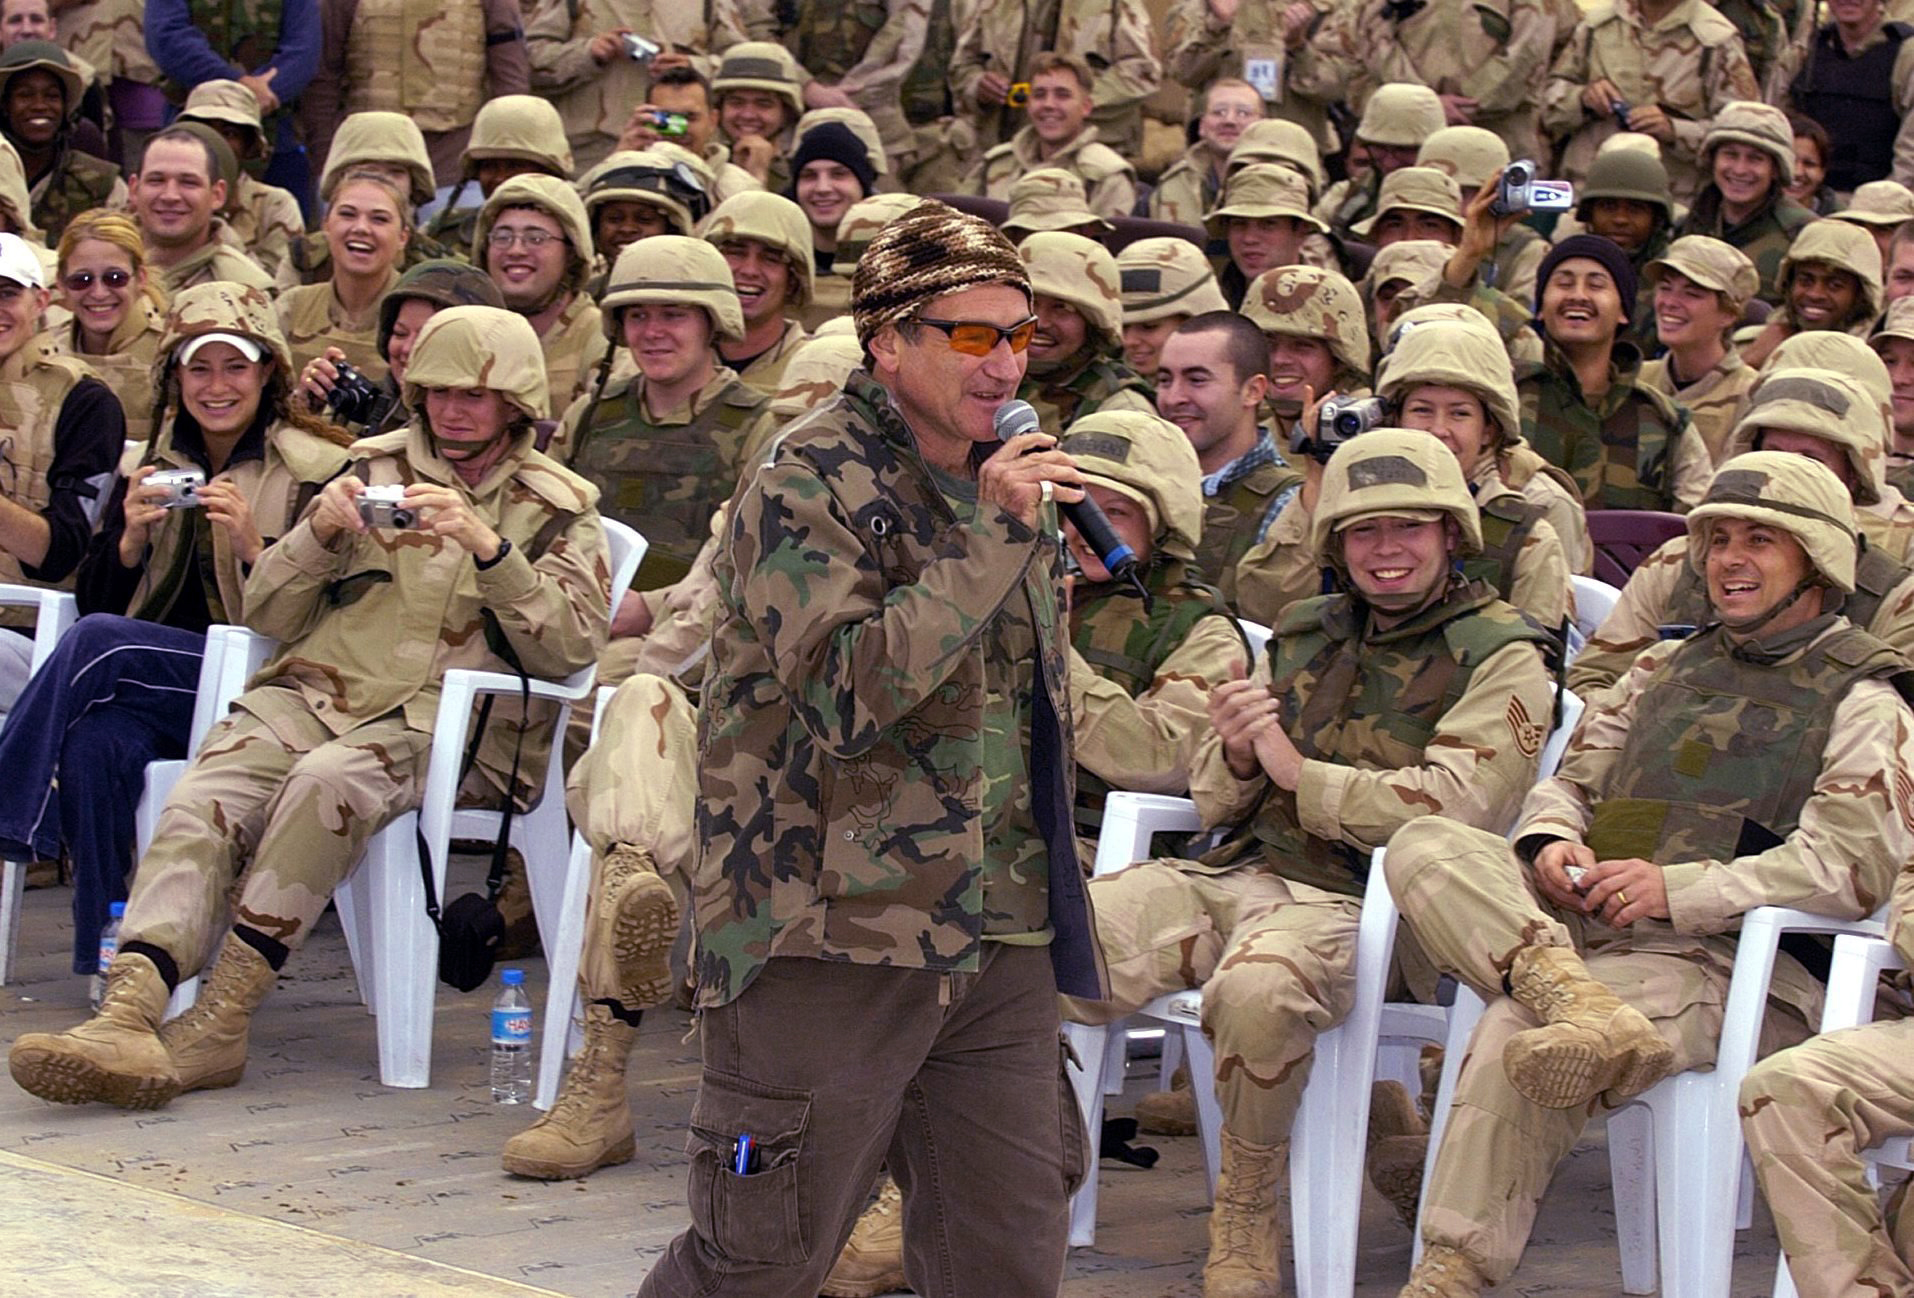 Robin Williams wears a camouflage jacket while entertaining a cheering crowd of US troops as part of a United Service Organiztions (USO) Holiday Tour at the International Airport in Baghdad, Dec. 16, 2003. (Mike Theiler—EPA)